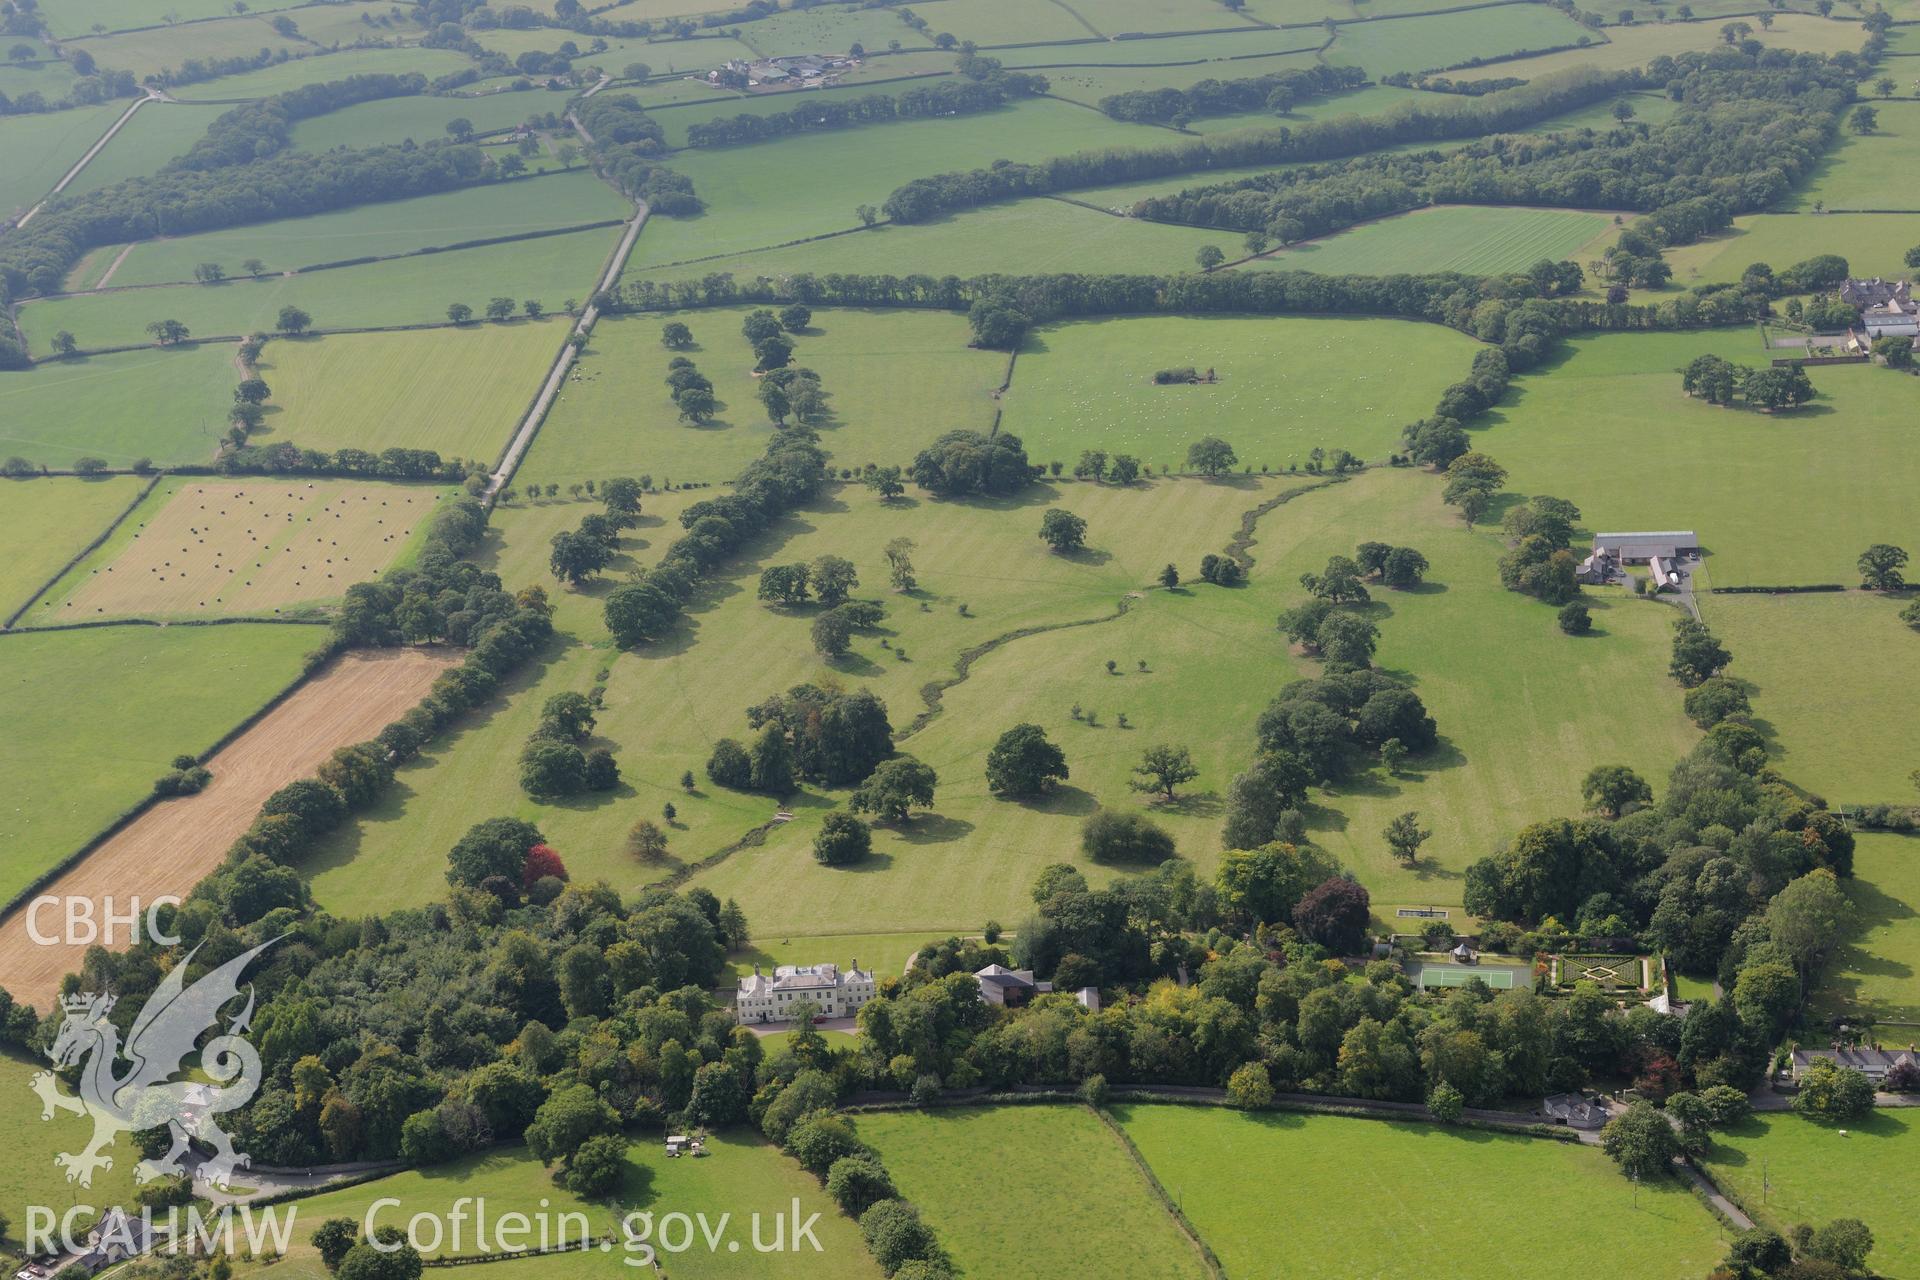 Brynbella mansion and garden, Tremeirchion. Oblique aerial photograph taken during the Royal Commission's programme of archaeological aerial reconnaissance by Toby Driver on 11th September 2015.